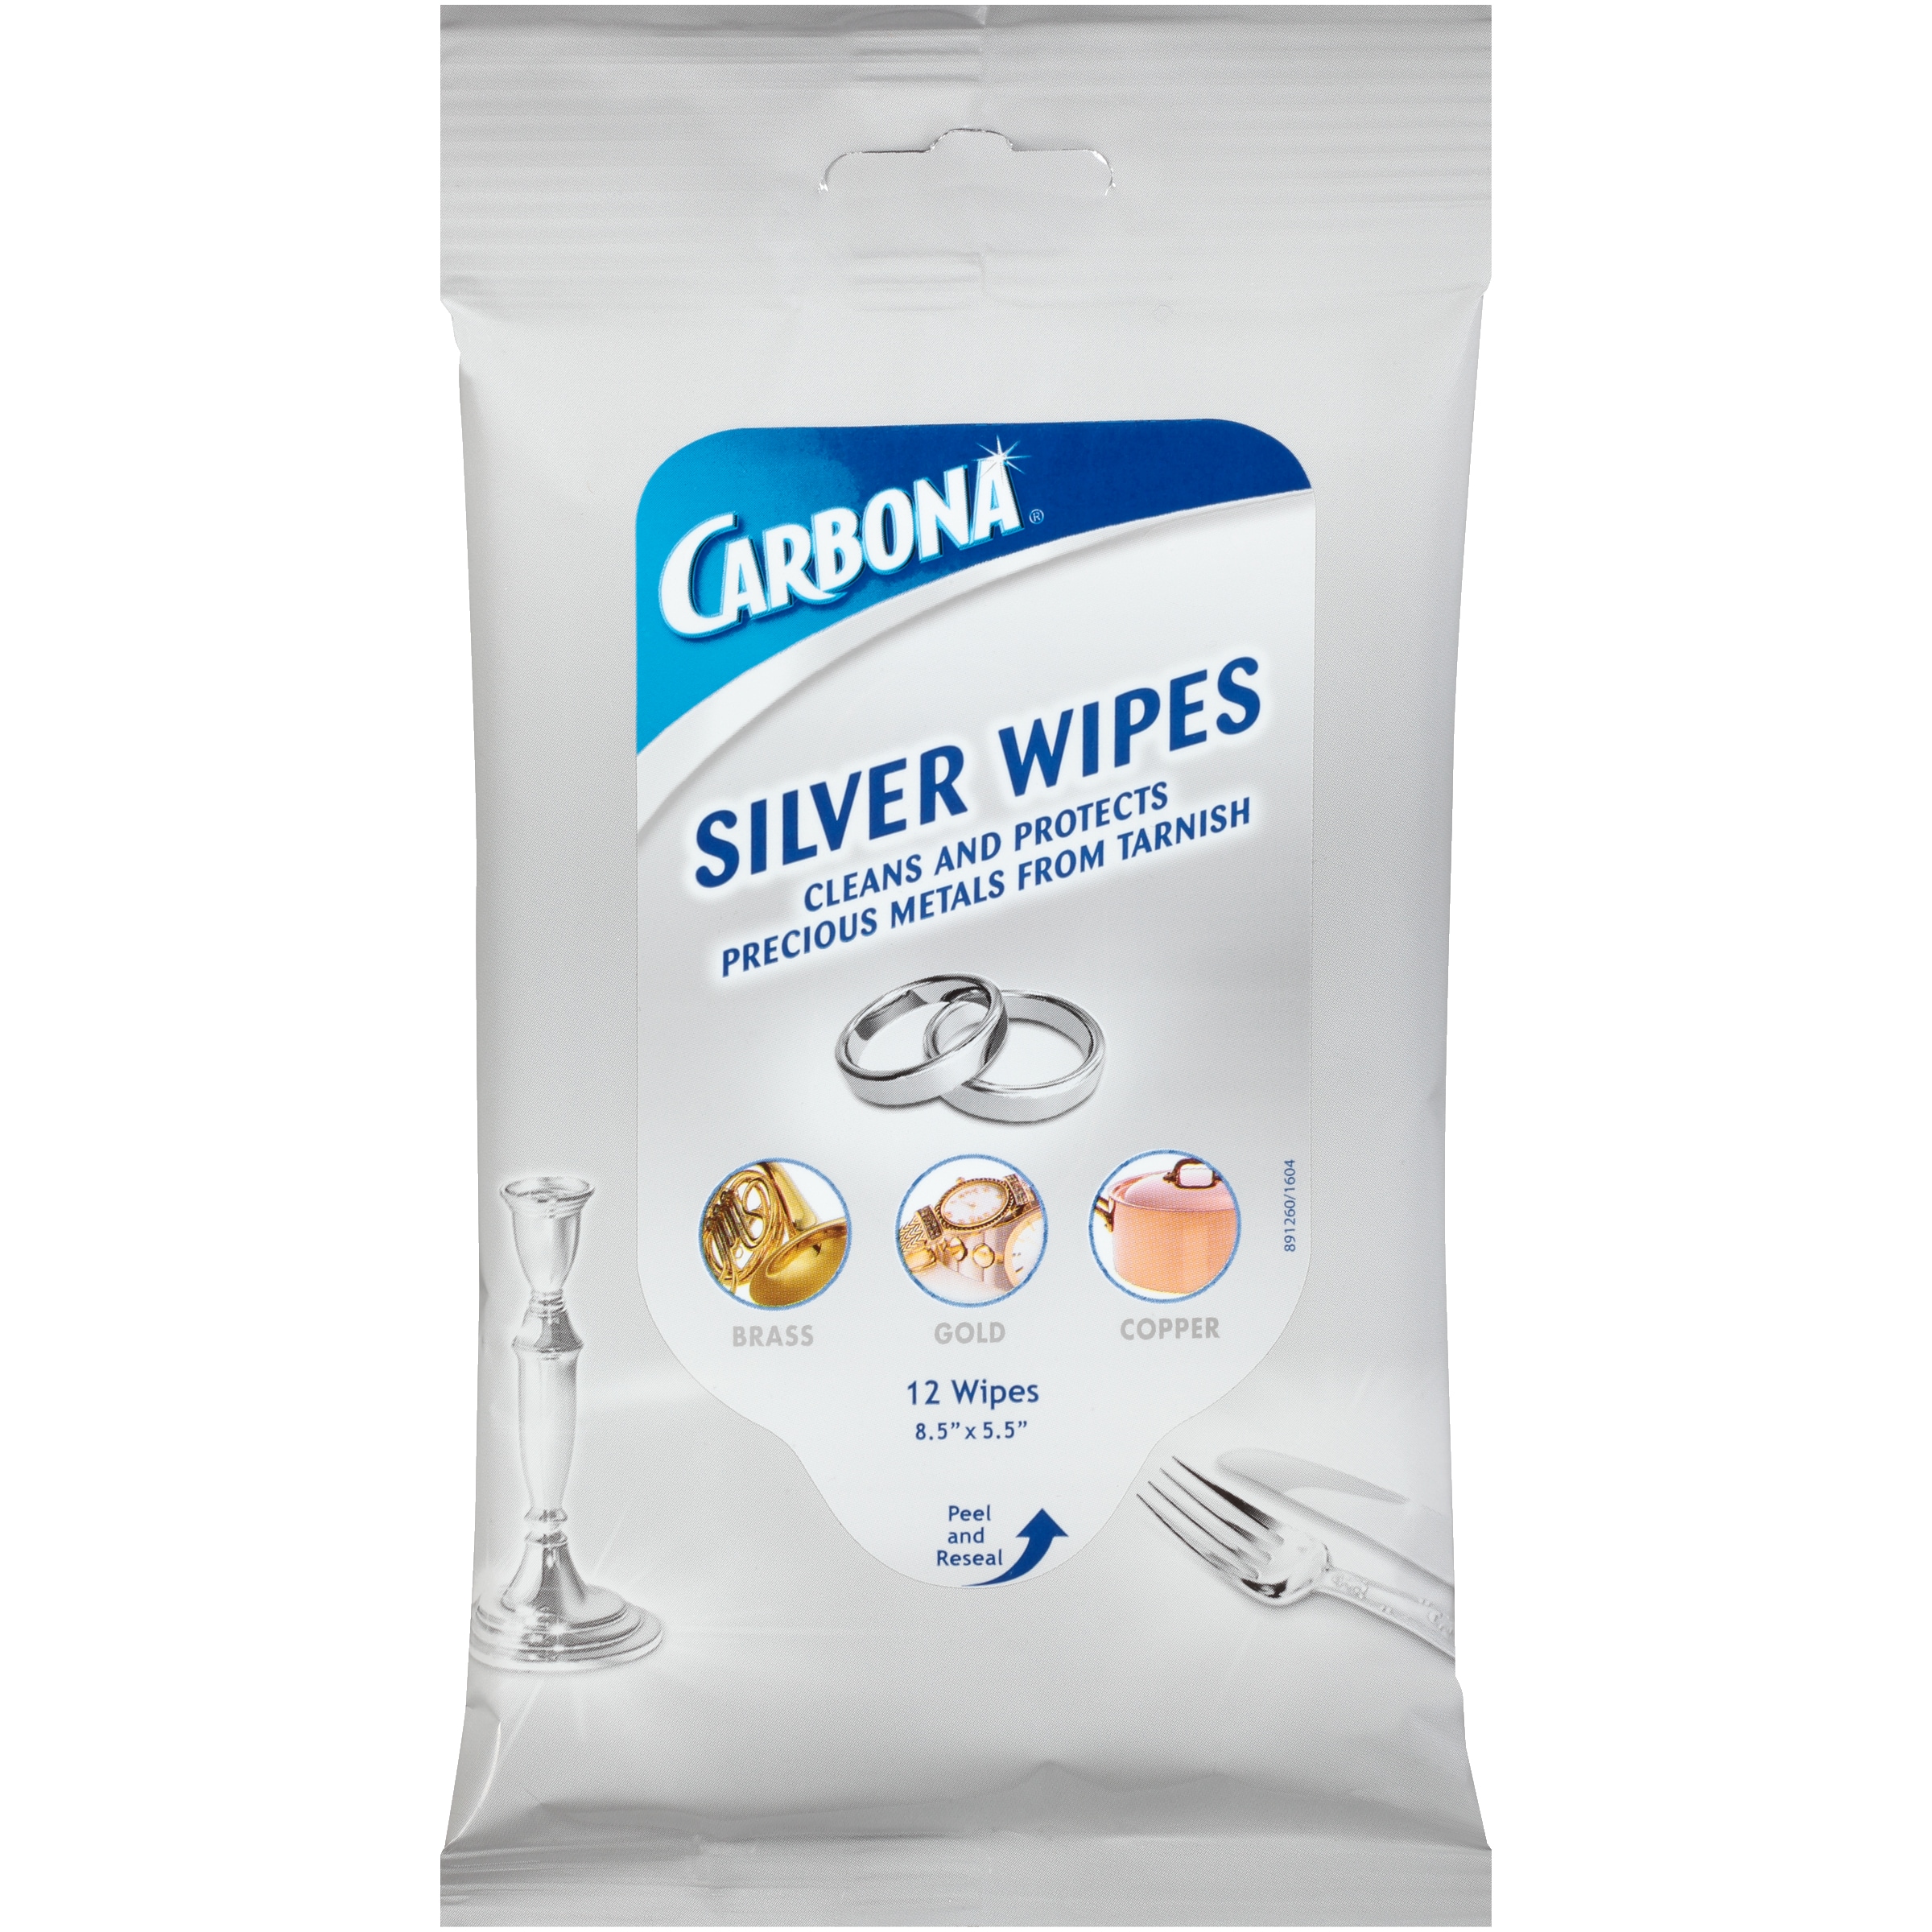 Carbona Carbona Silver Wipes 12 ct. (10 boxes) Cotton Detergent Wet Wipe at